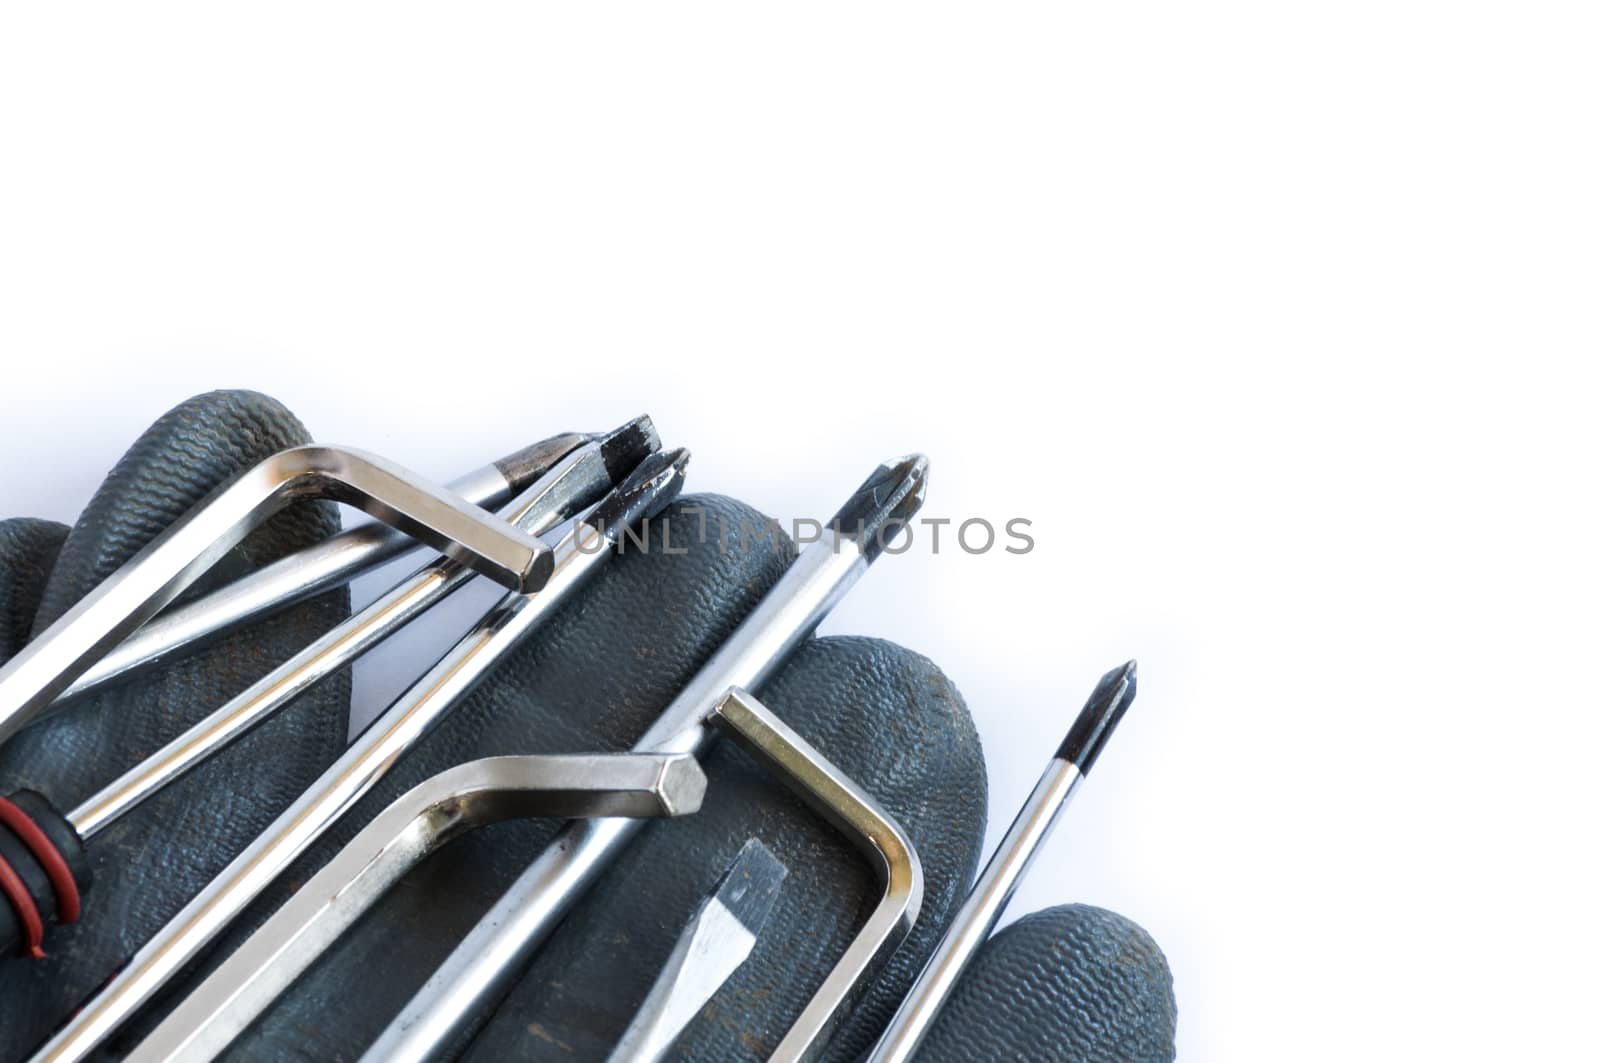 Set of screwdrivers and glove over a white background with space for text